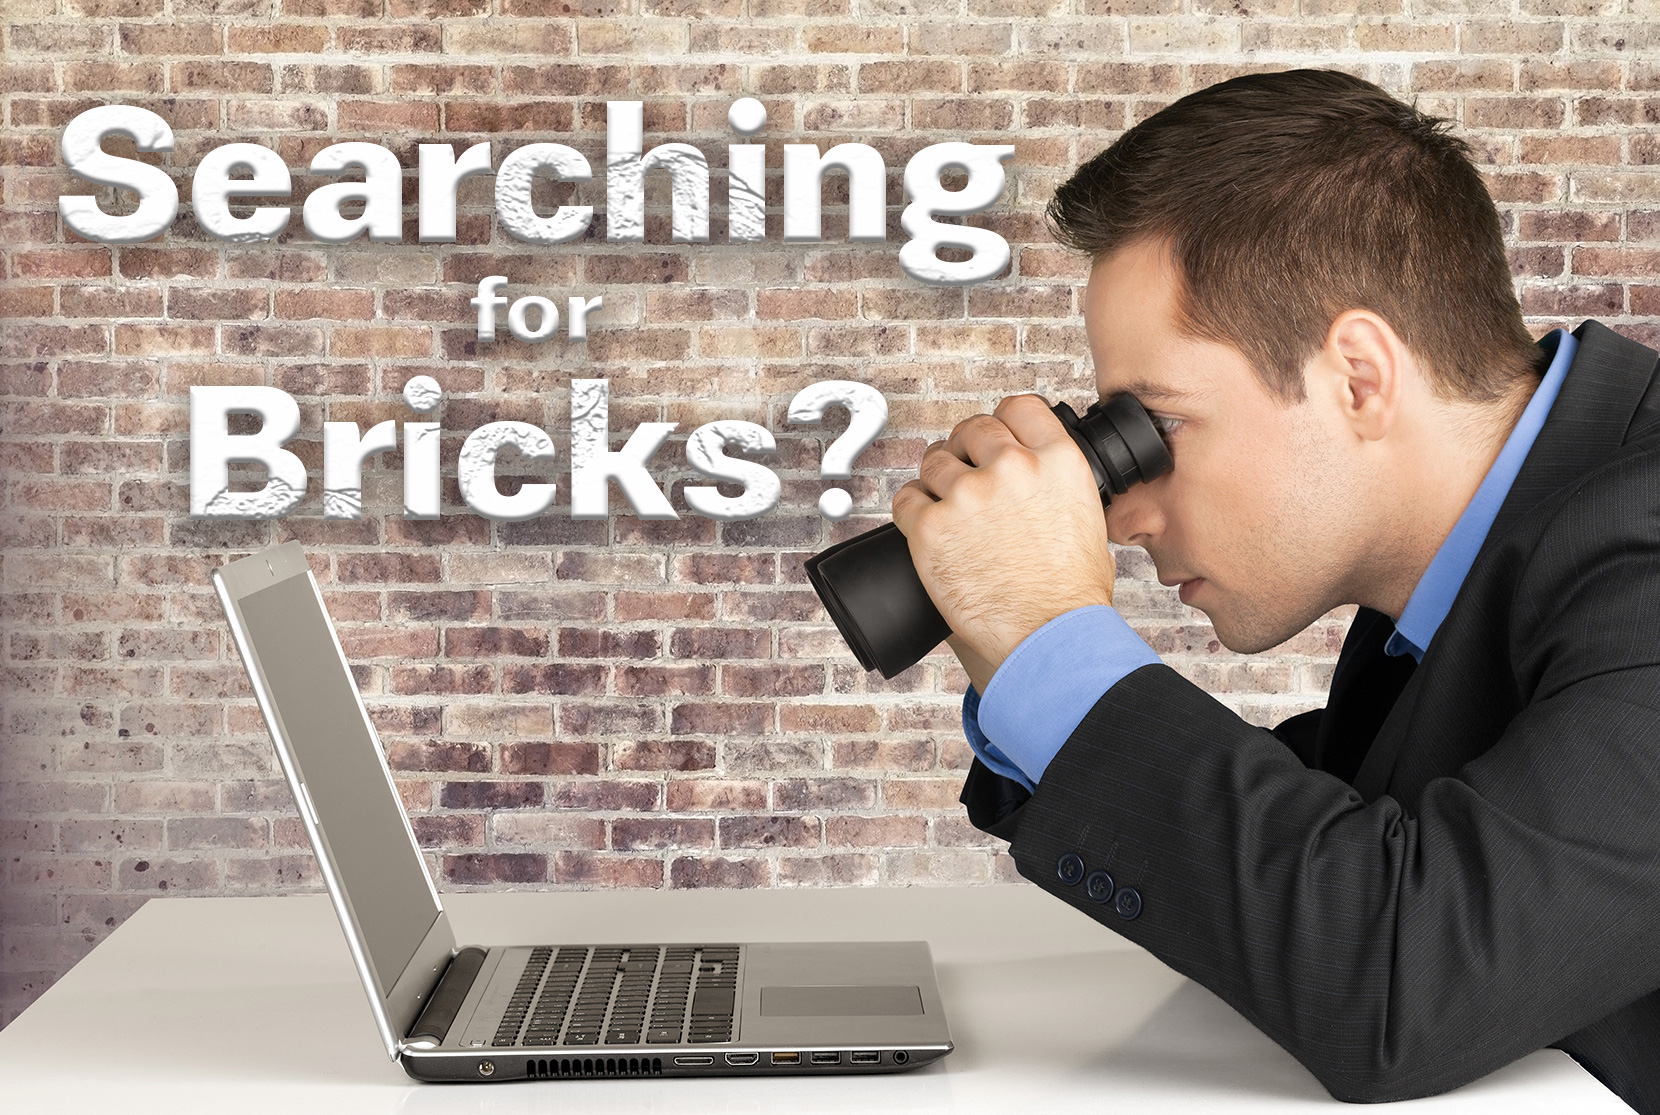 Are you looking for bricks?